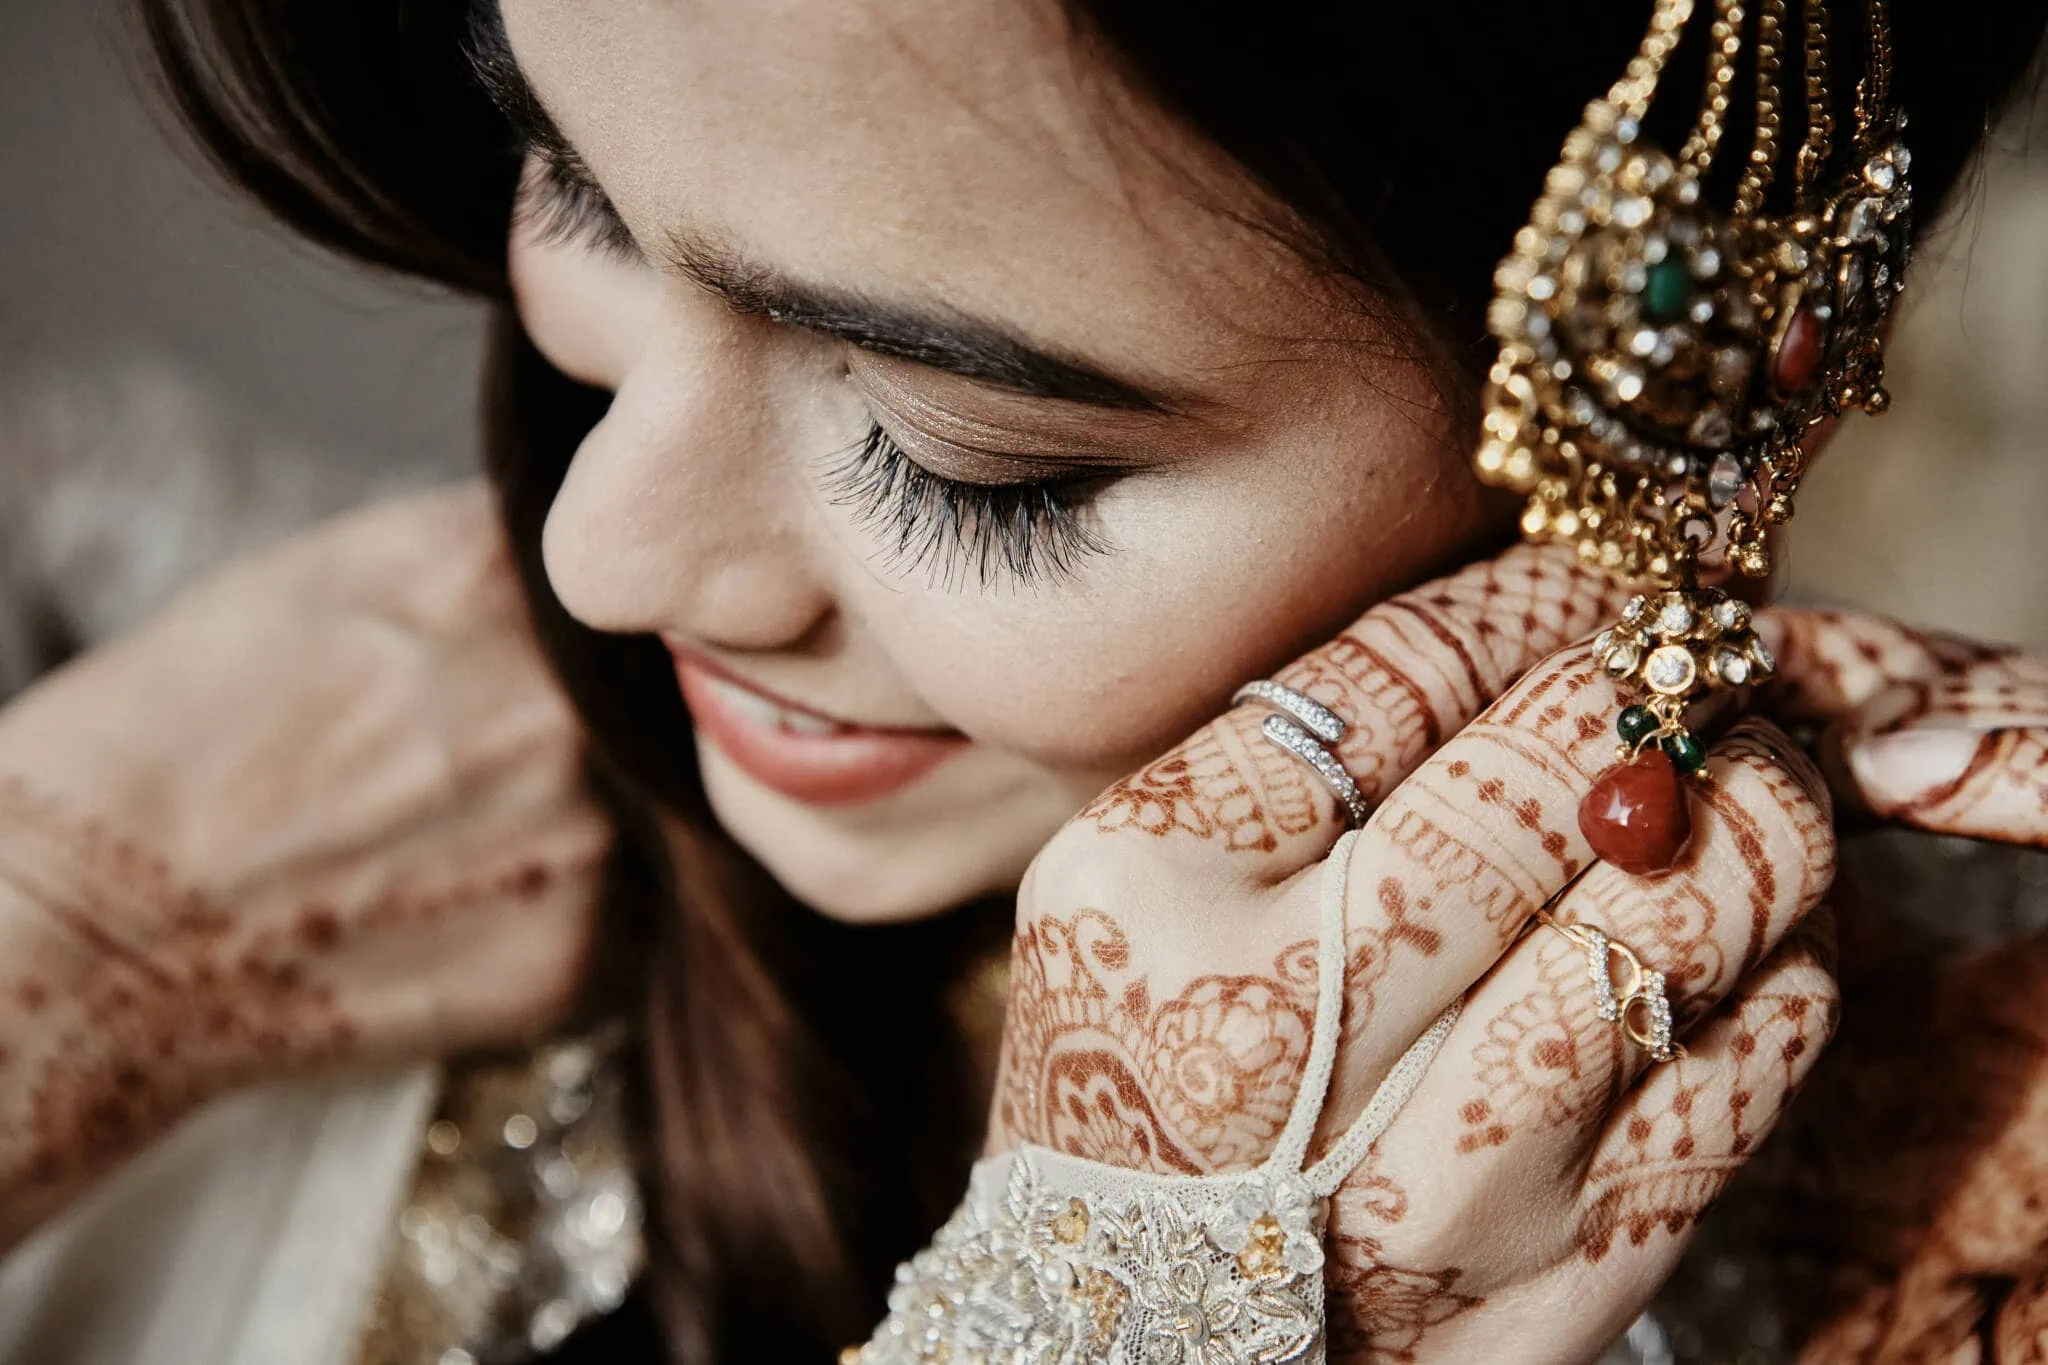 Queenstown New Zealand Elopement Wedding Photographer - A Queenstown Islamic wedding with Yumn and Wasim, featuring a bride adorning henna jewelry.